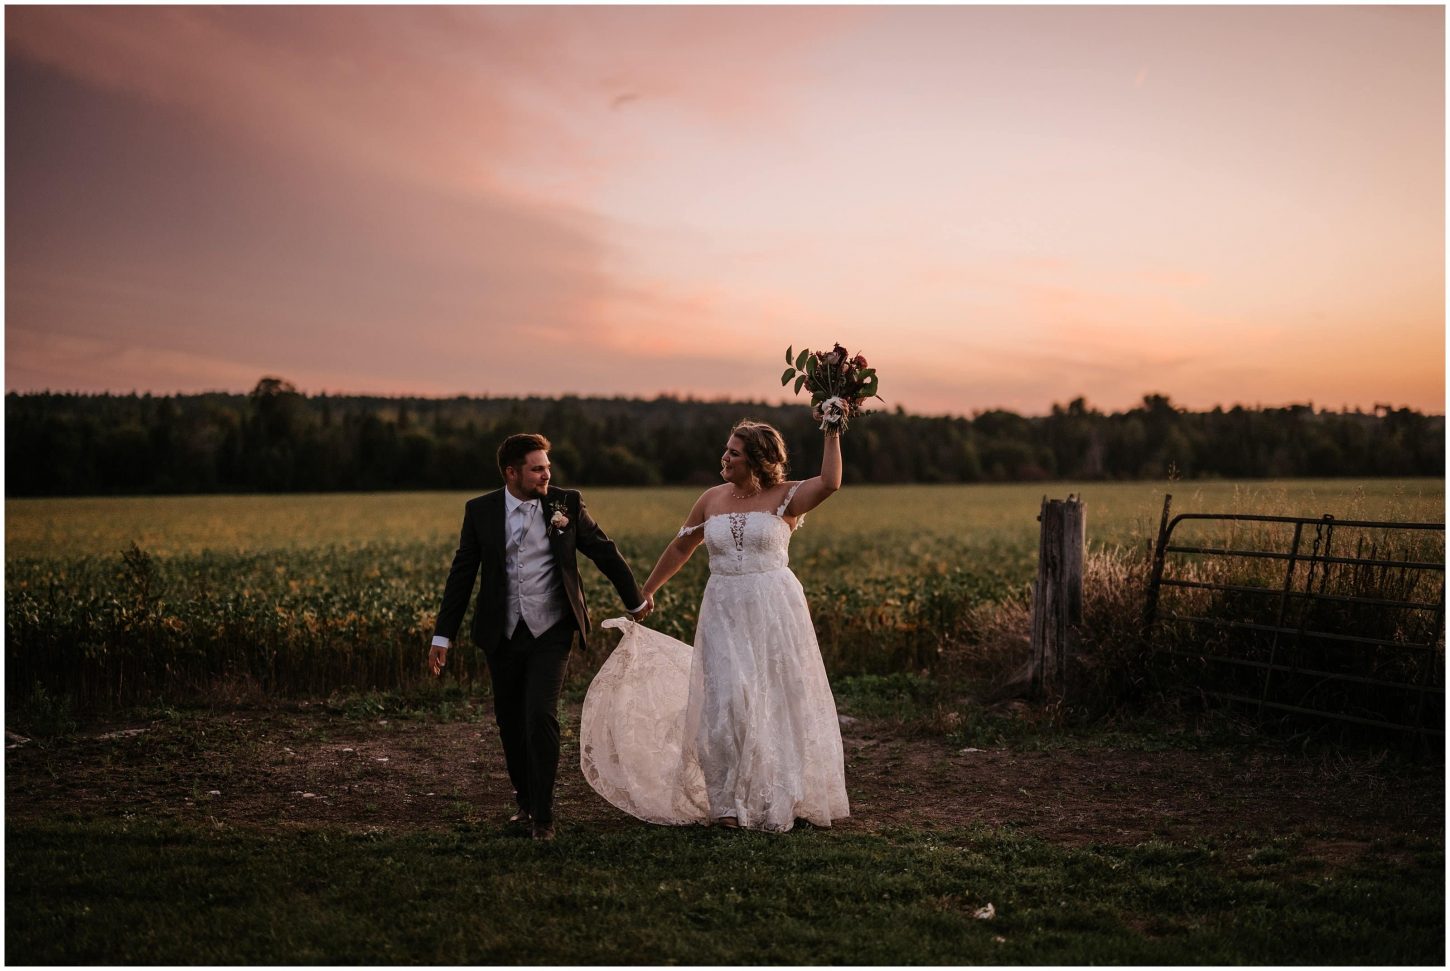 A bride and groom cheer in a field as the pink sun sets